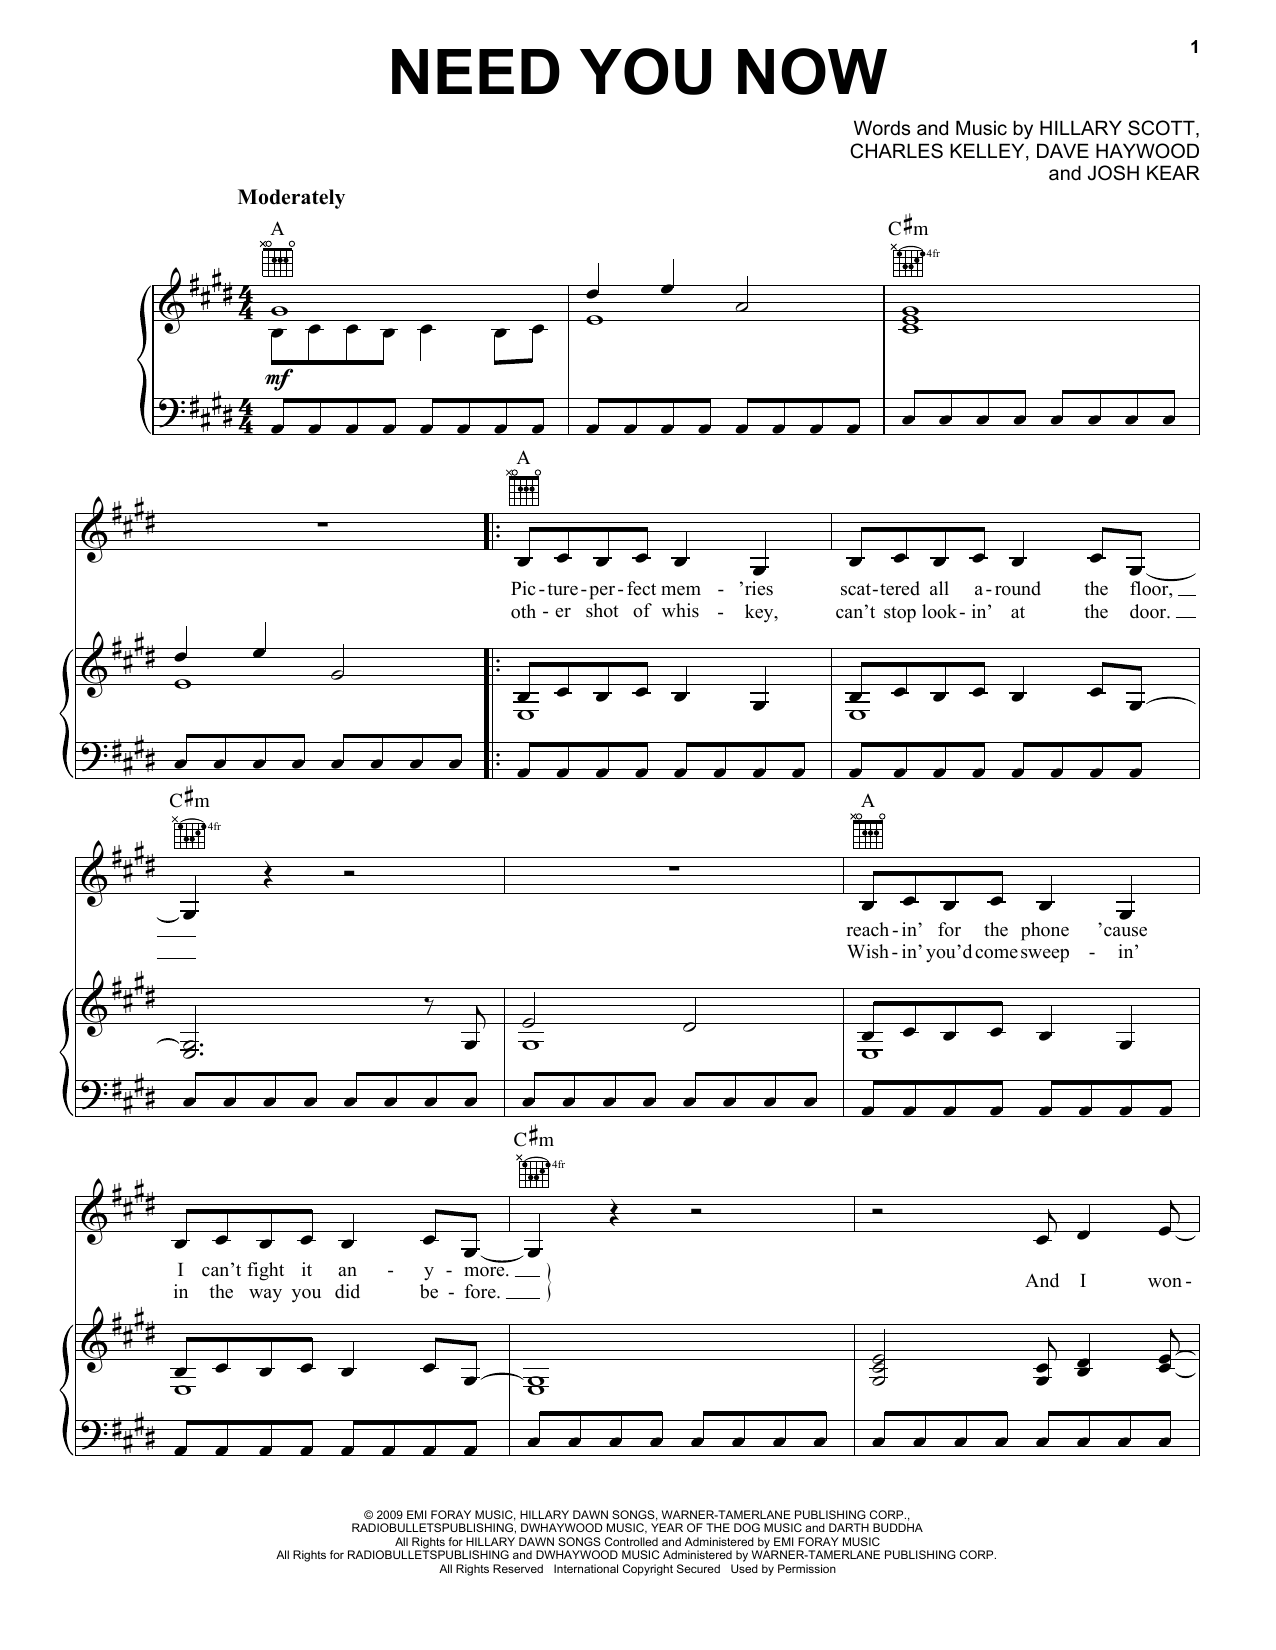 Download Lady Antebellum Need You Now Sheet Music